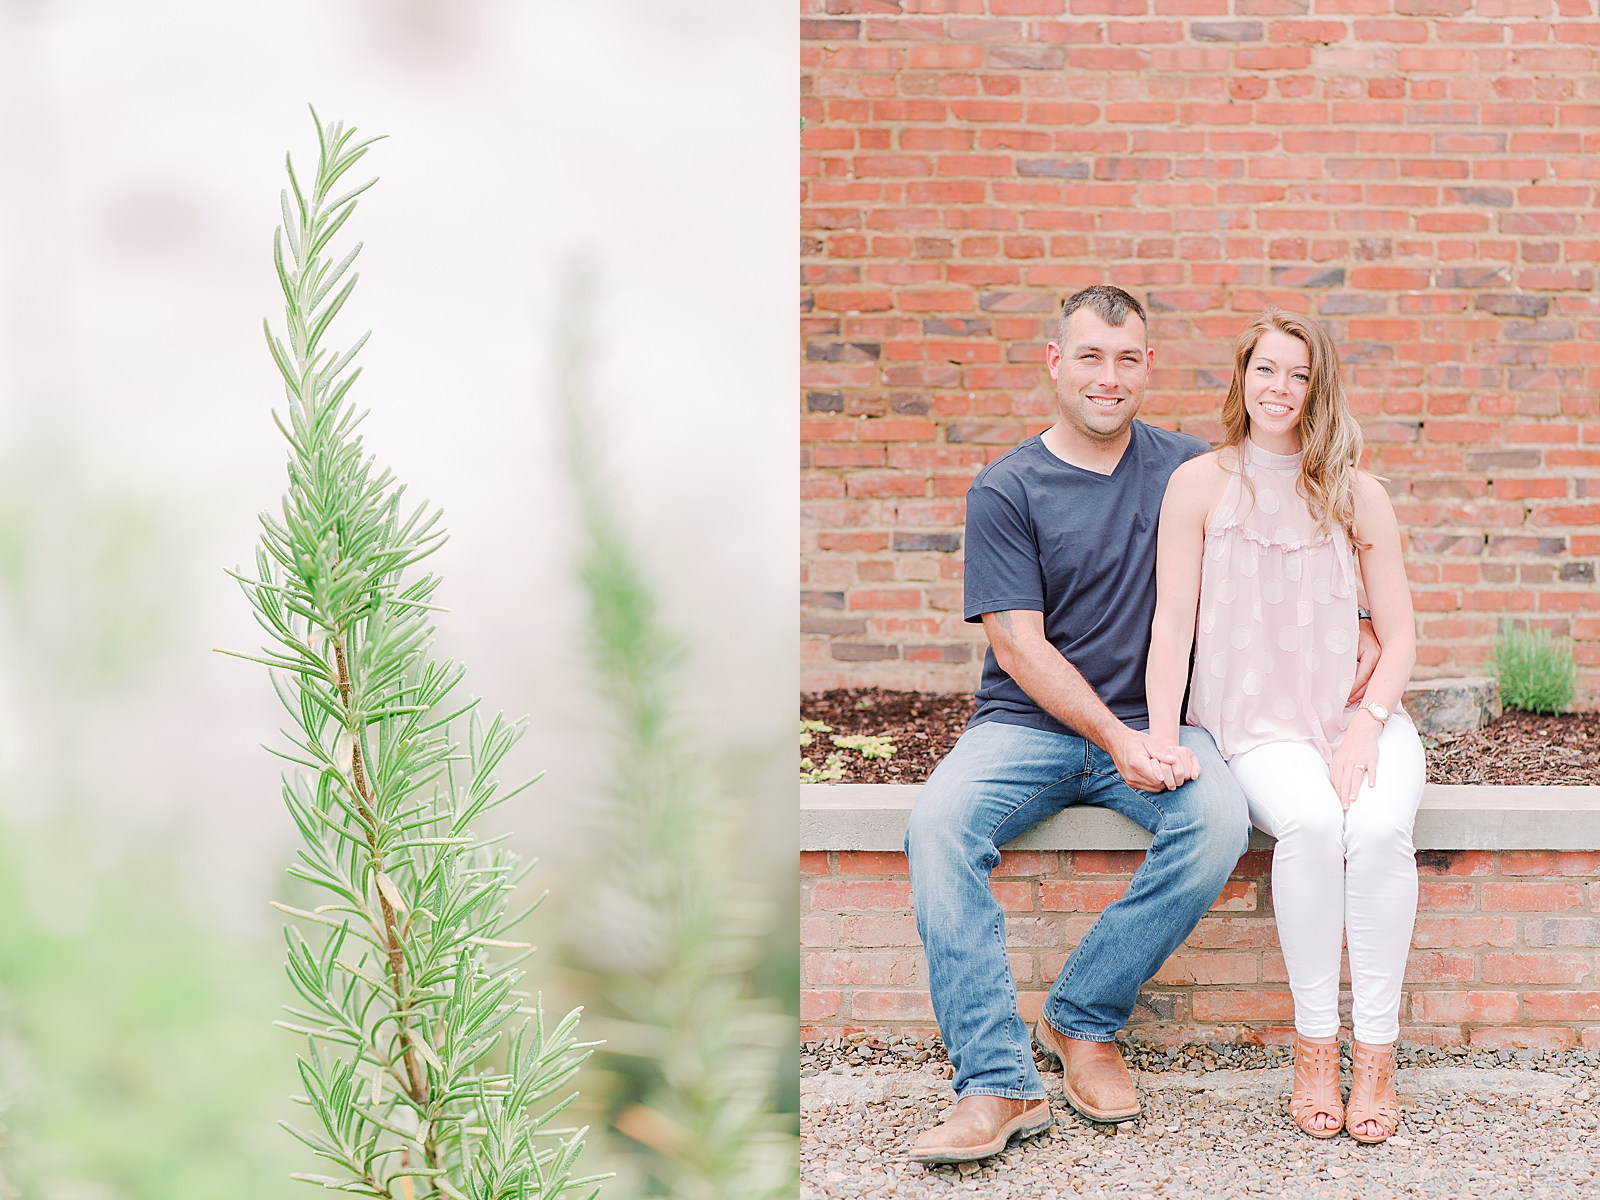 Hackney Warehouse Engagement Session Detail of plant and couple sitting on knee wall Photos